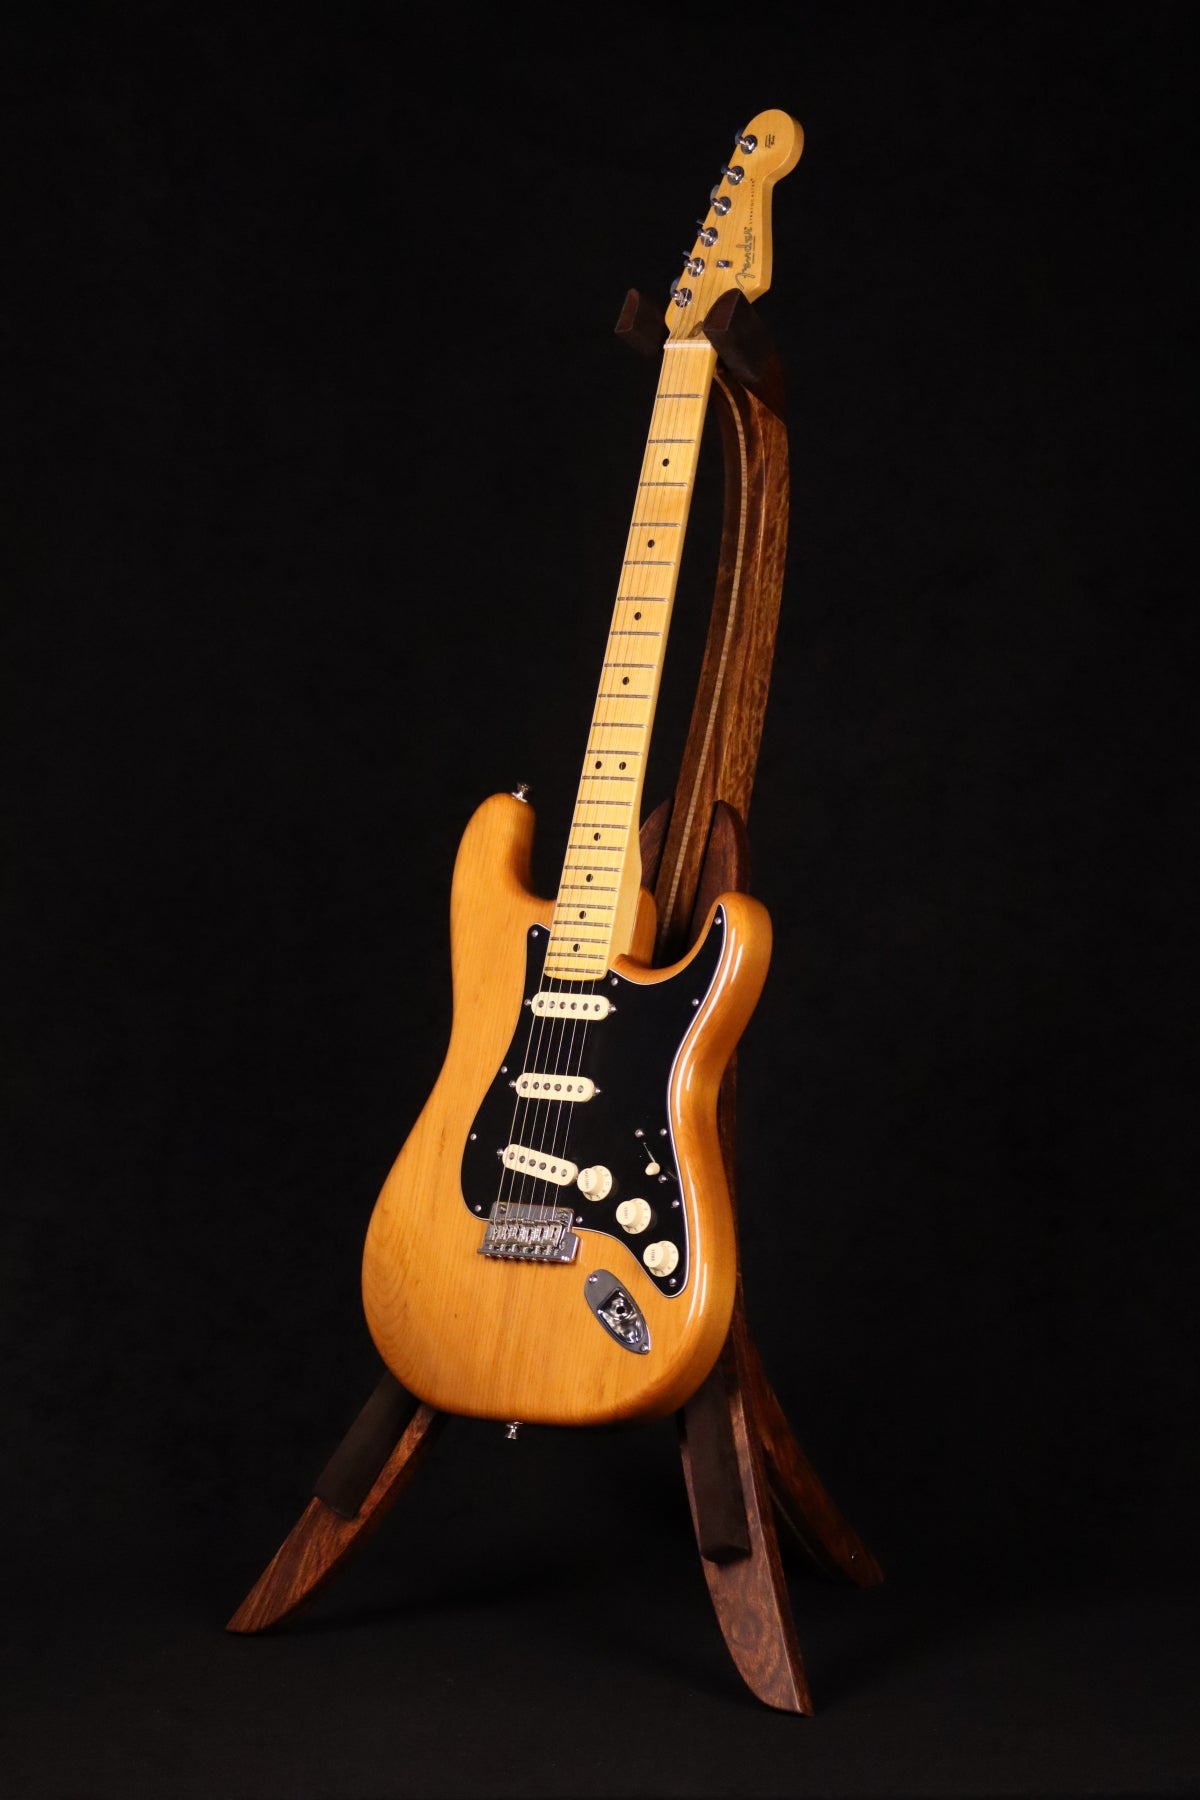 Folding chechen Caribbean rosewood and curly maple wood guitar floor stand full front image with Fender guitar